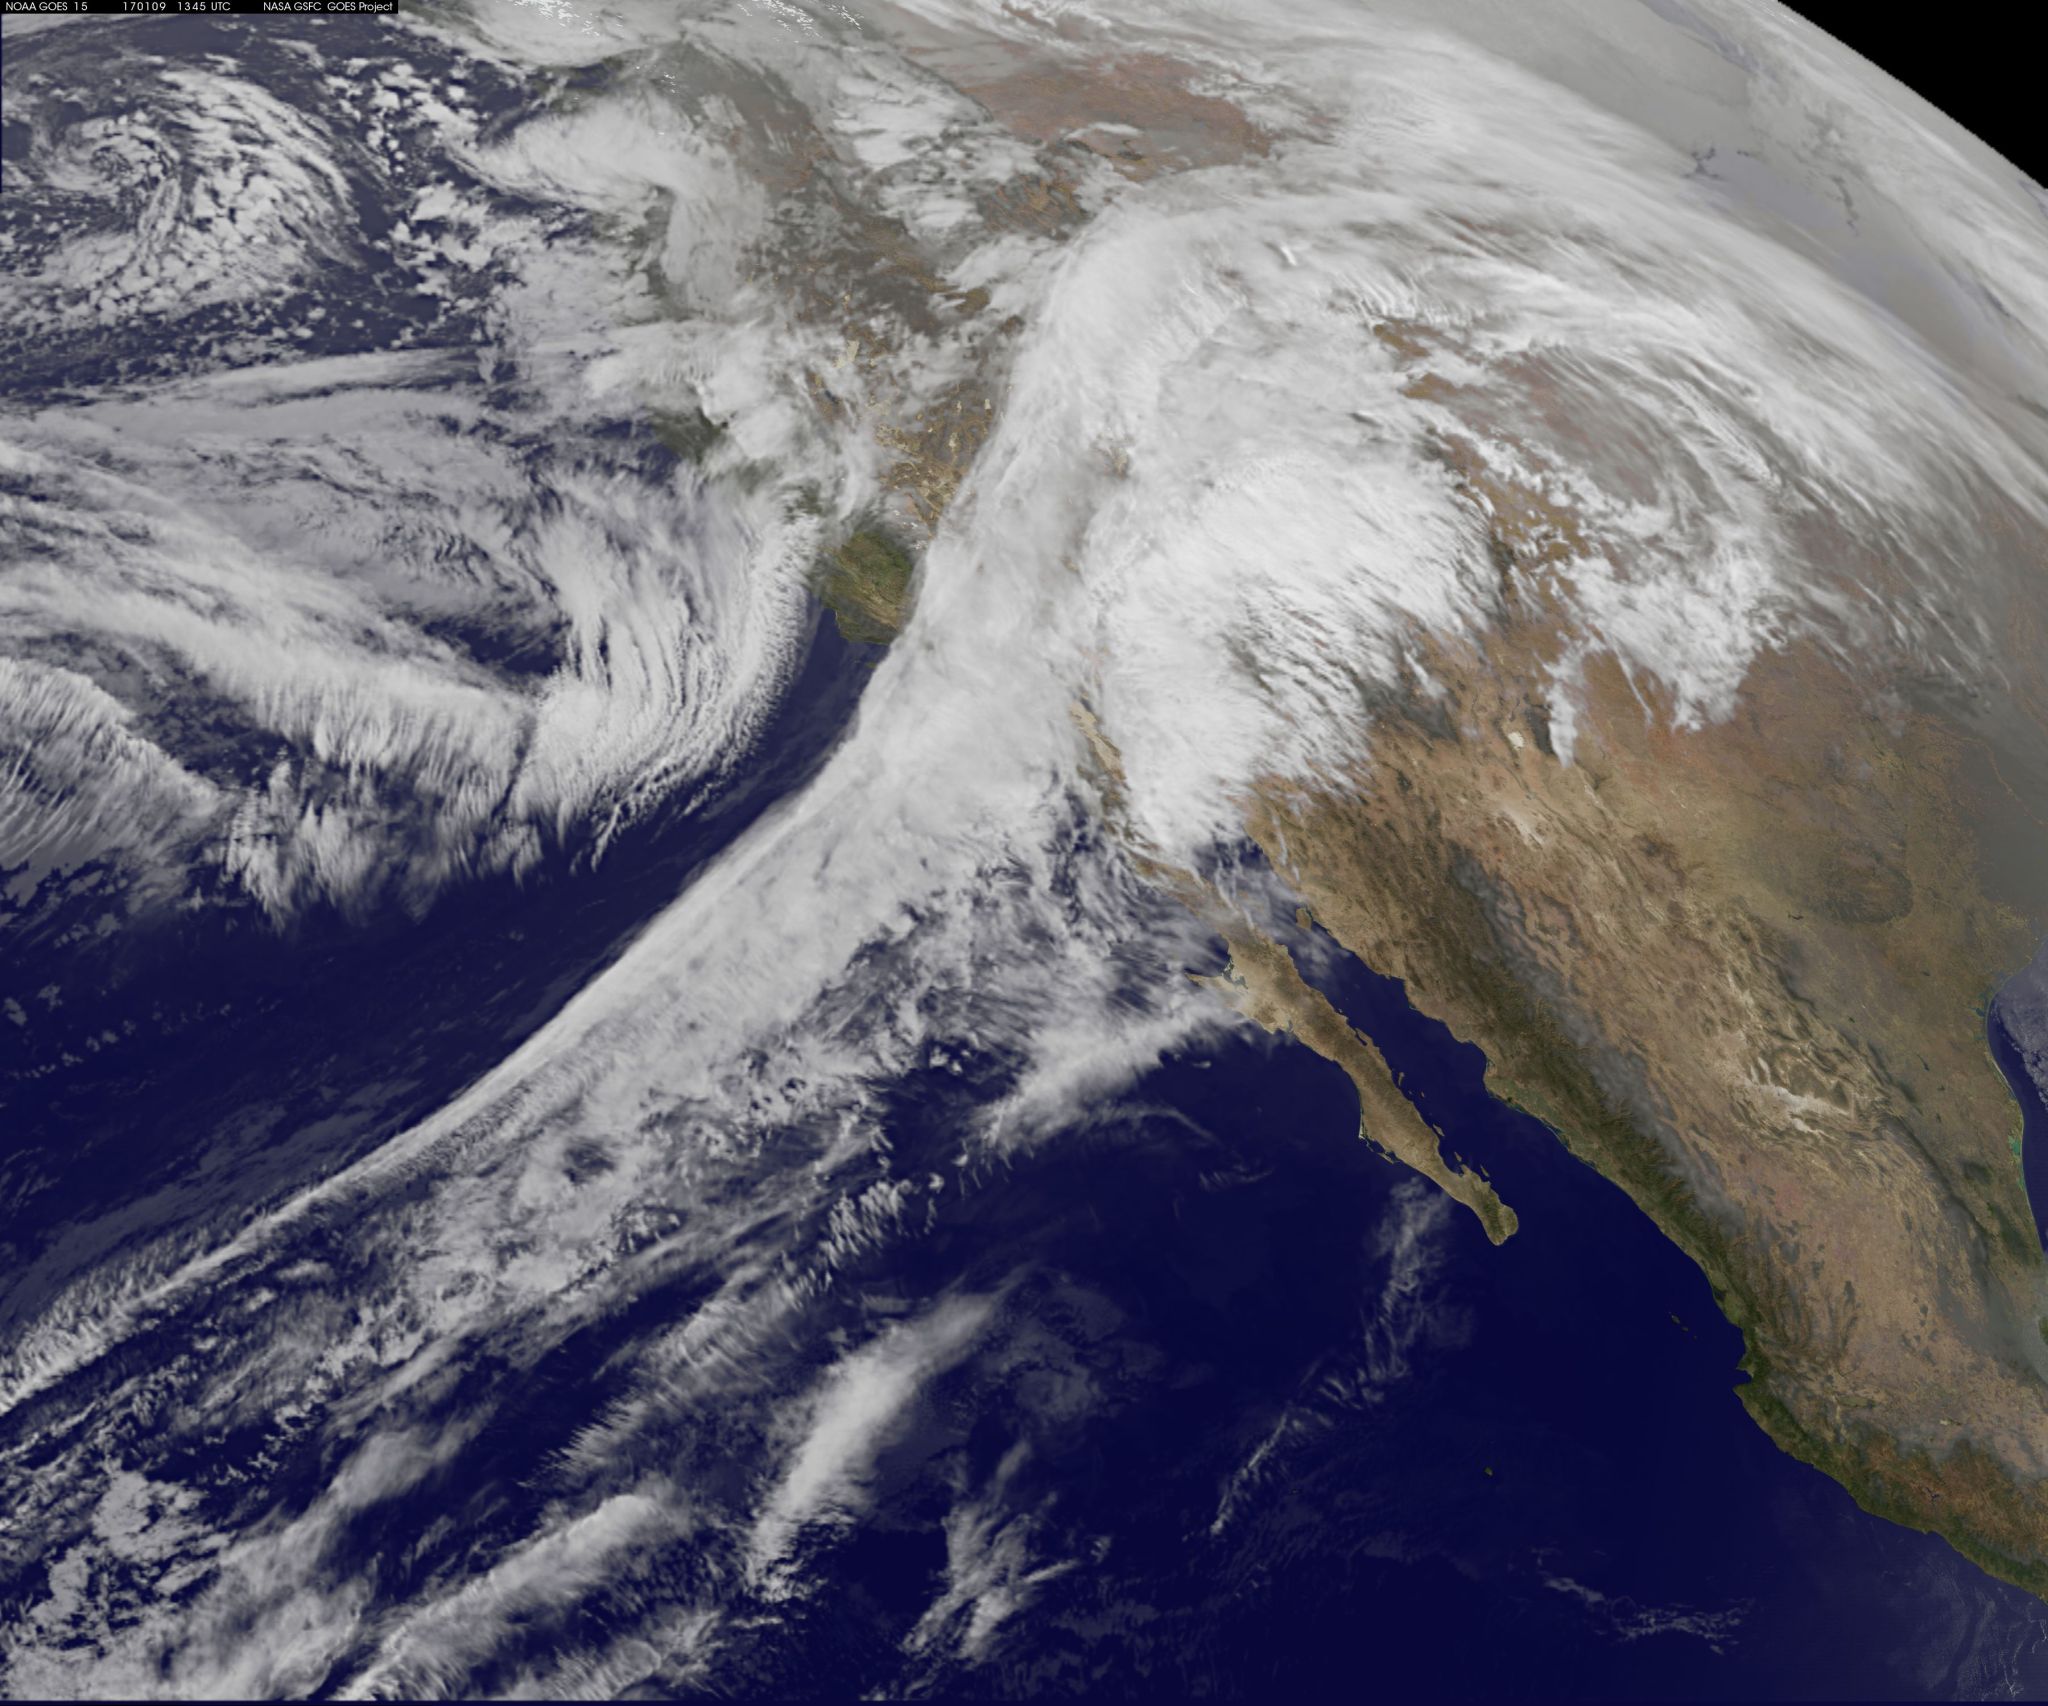 GOES image of winter storm in the Pacific Northwest